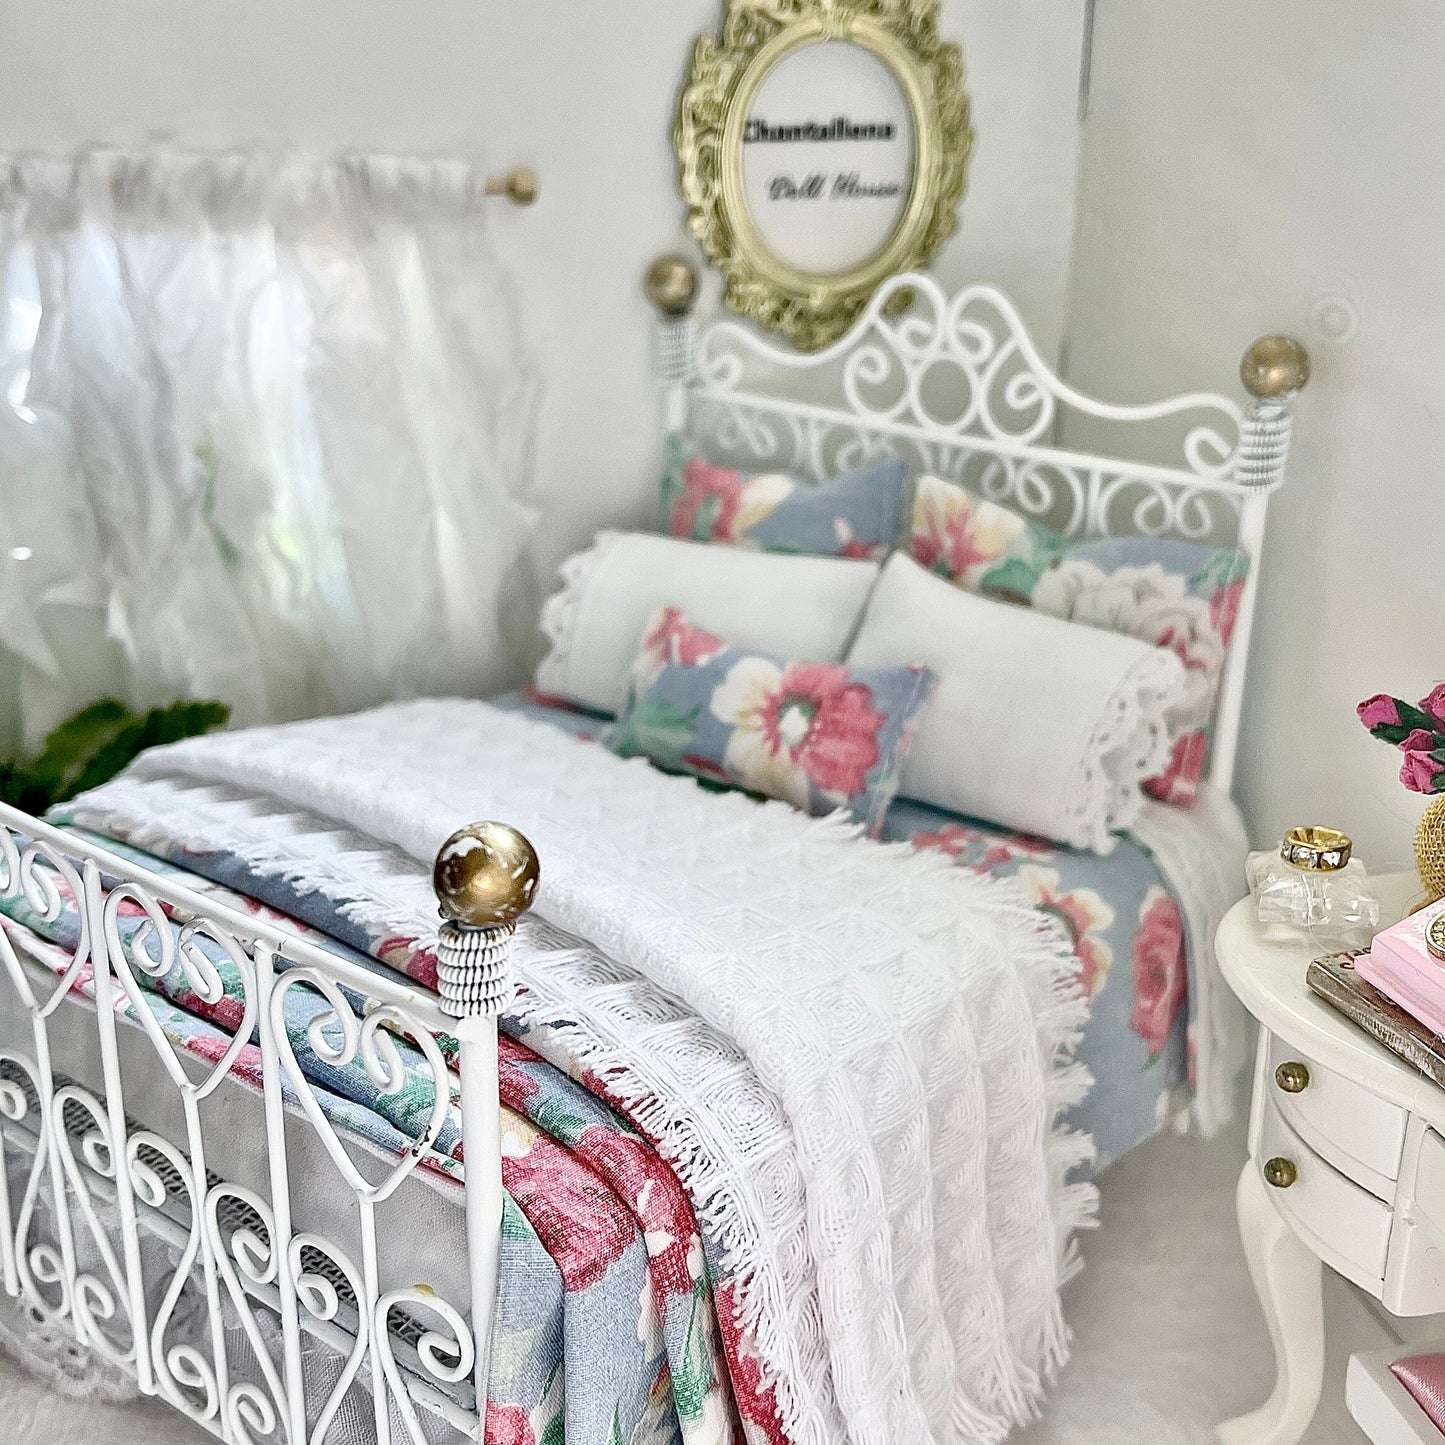 Chantallena Doll House Single Bedding Set Prairie Country - Blue Floral Cotton Bedding Set with White Lace Trim 1:12 Scale